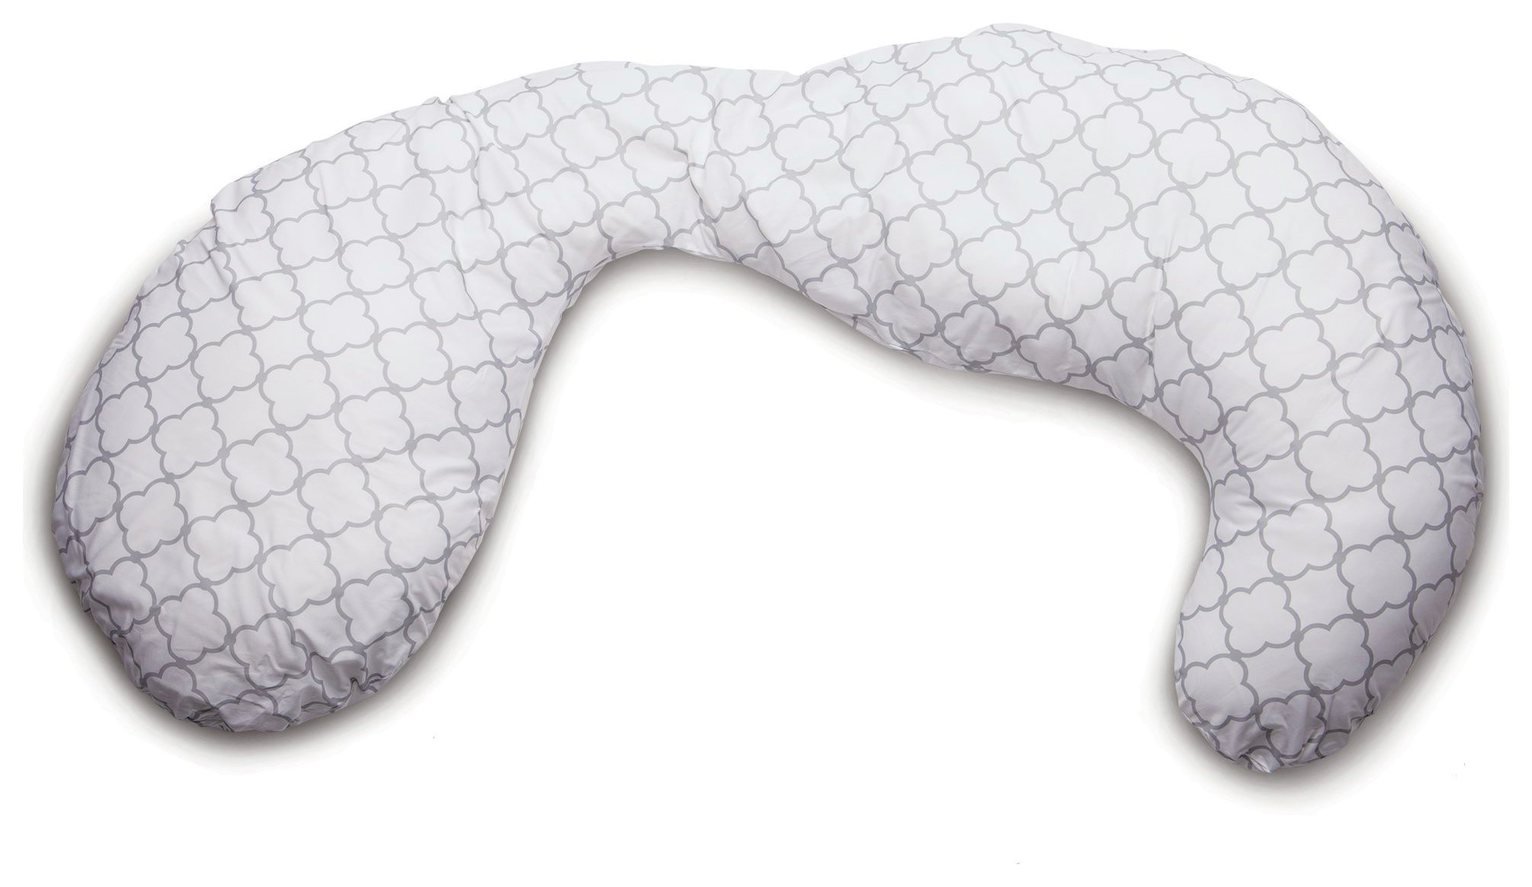 Chicco The Boppy Total Body Pillow